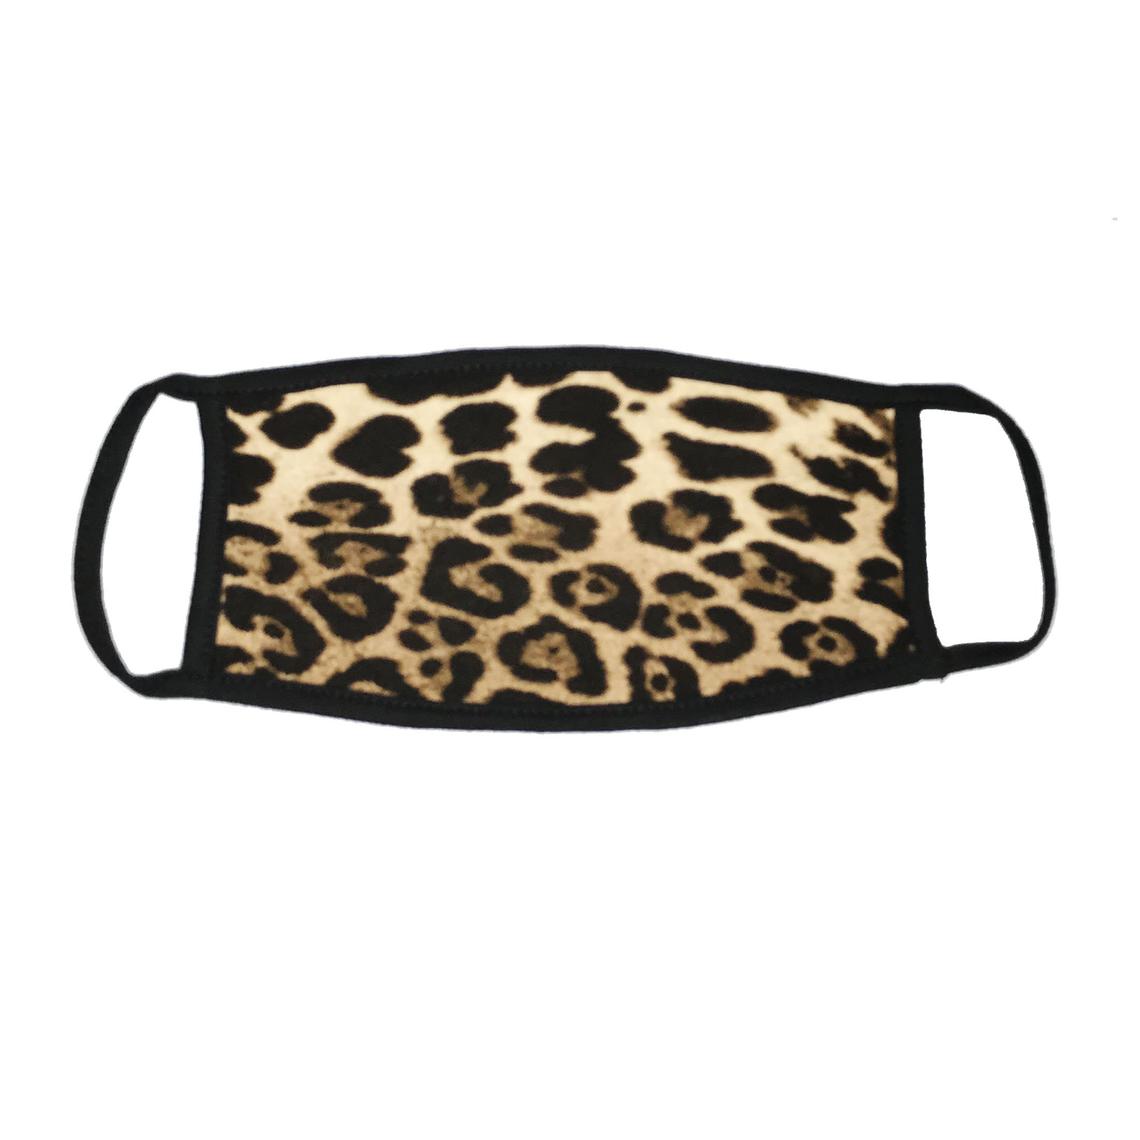 Reusabe Leopard Face Mask, Face Cover, Poly / Cotton, 2 PLY, Washable & Durable